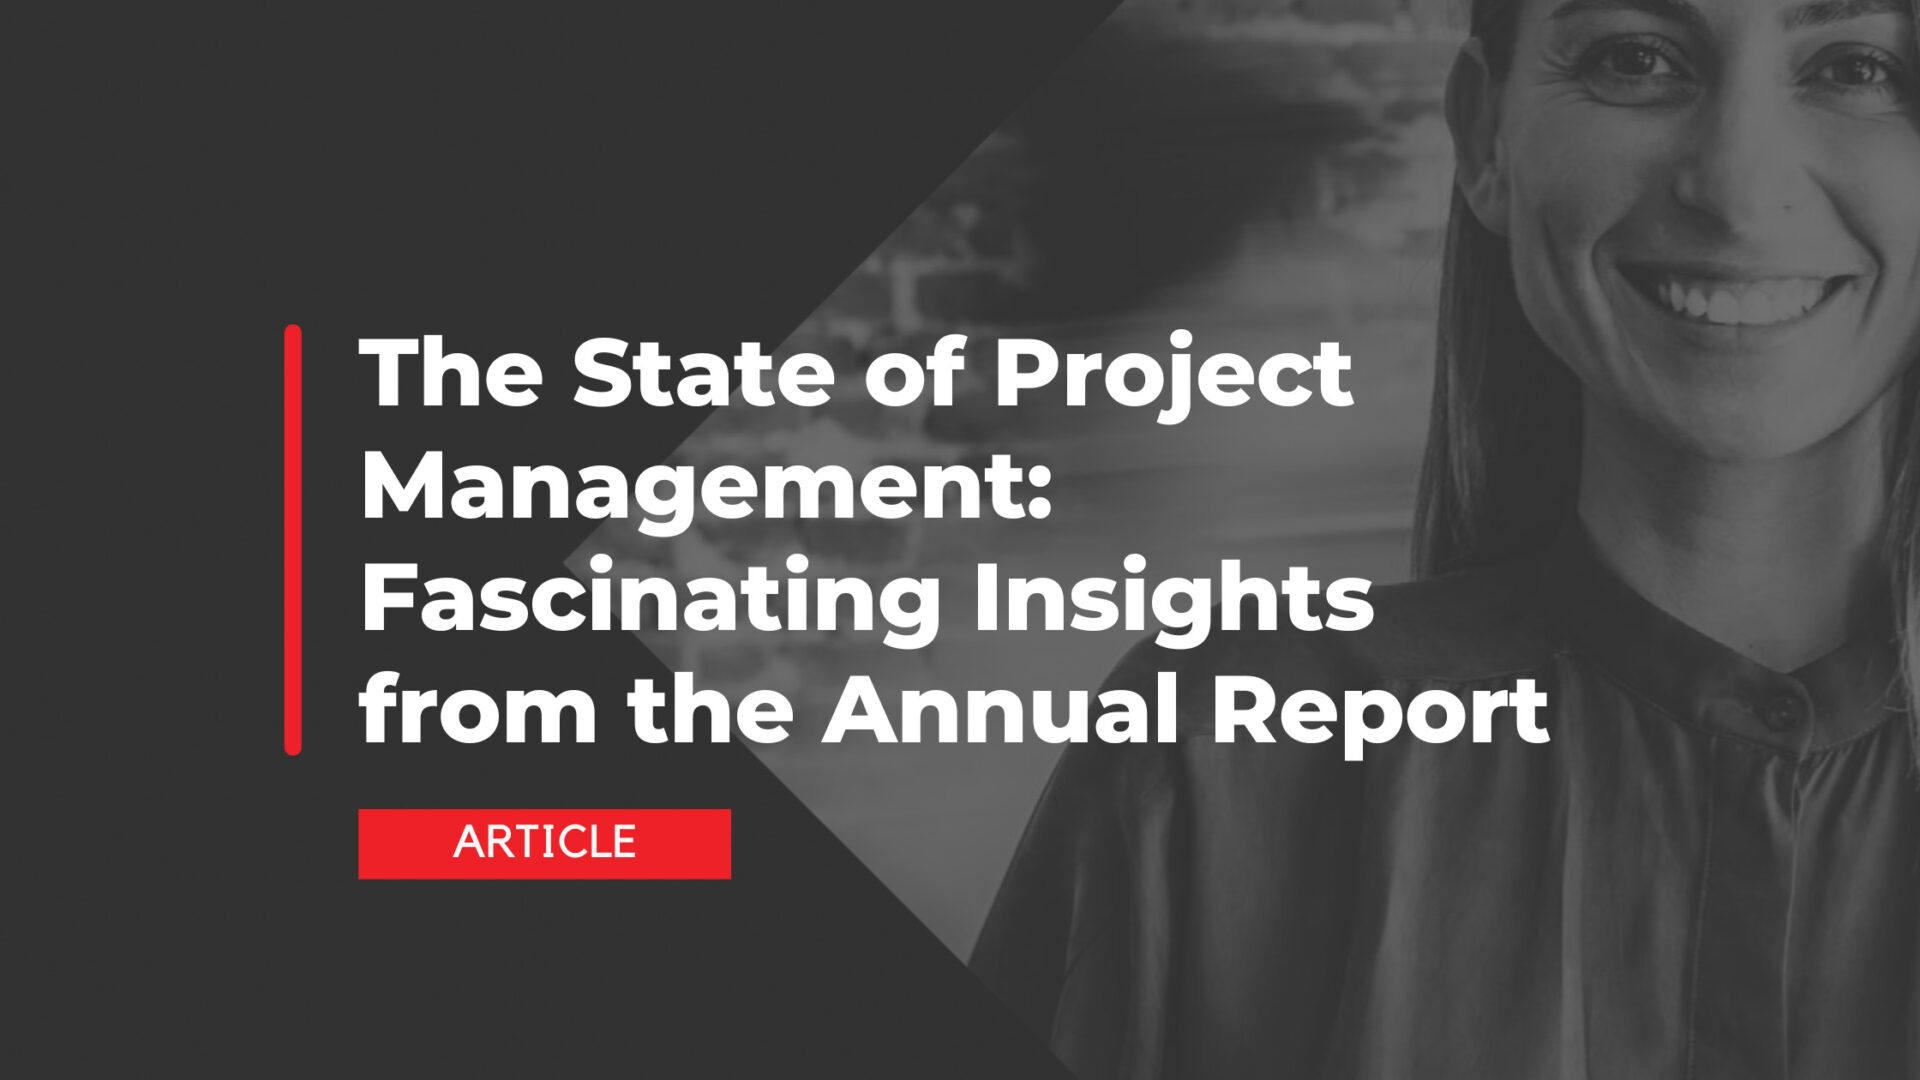 The State of Project Management: Fascinating Insights from the Annual Report